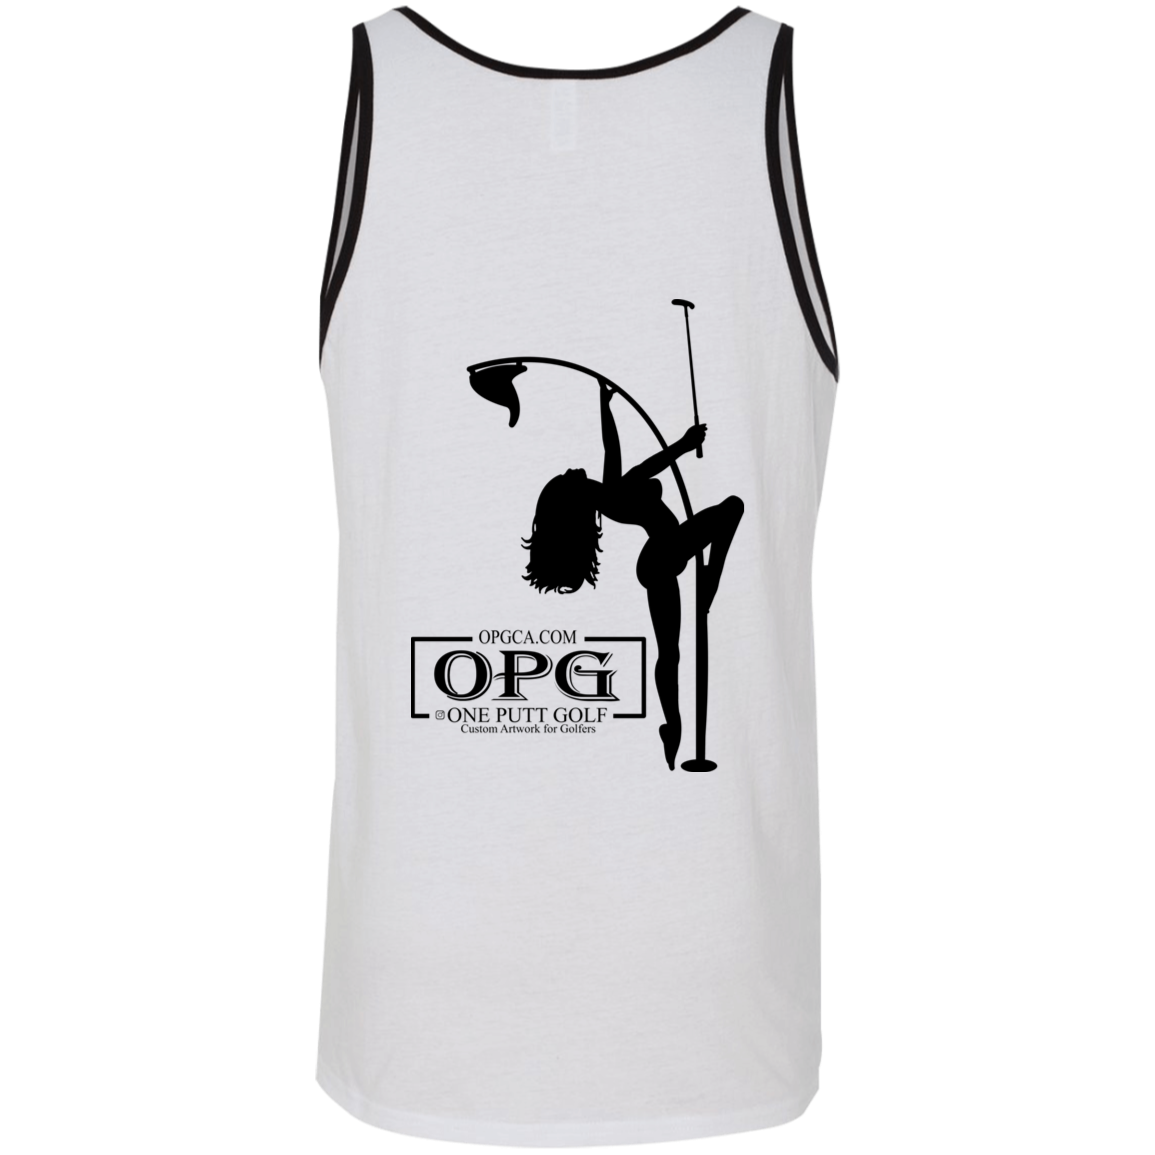 OPG Custom Design #10. Flag Pole. 2 Tone Tank 100% Combed and Ringspun Cotton